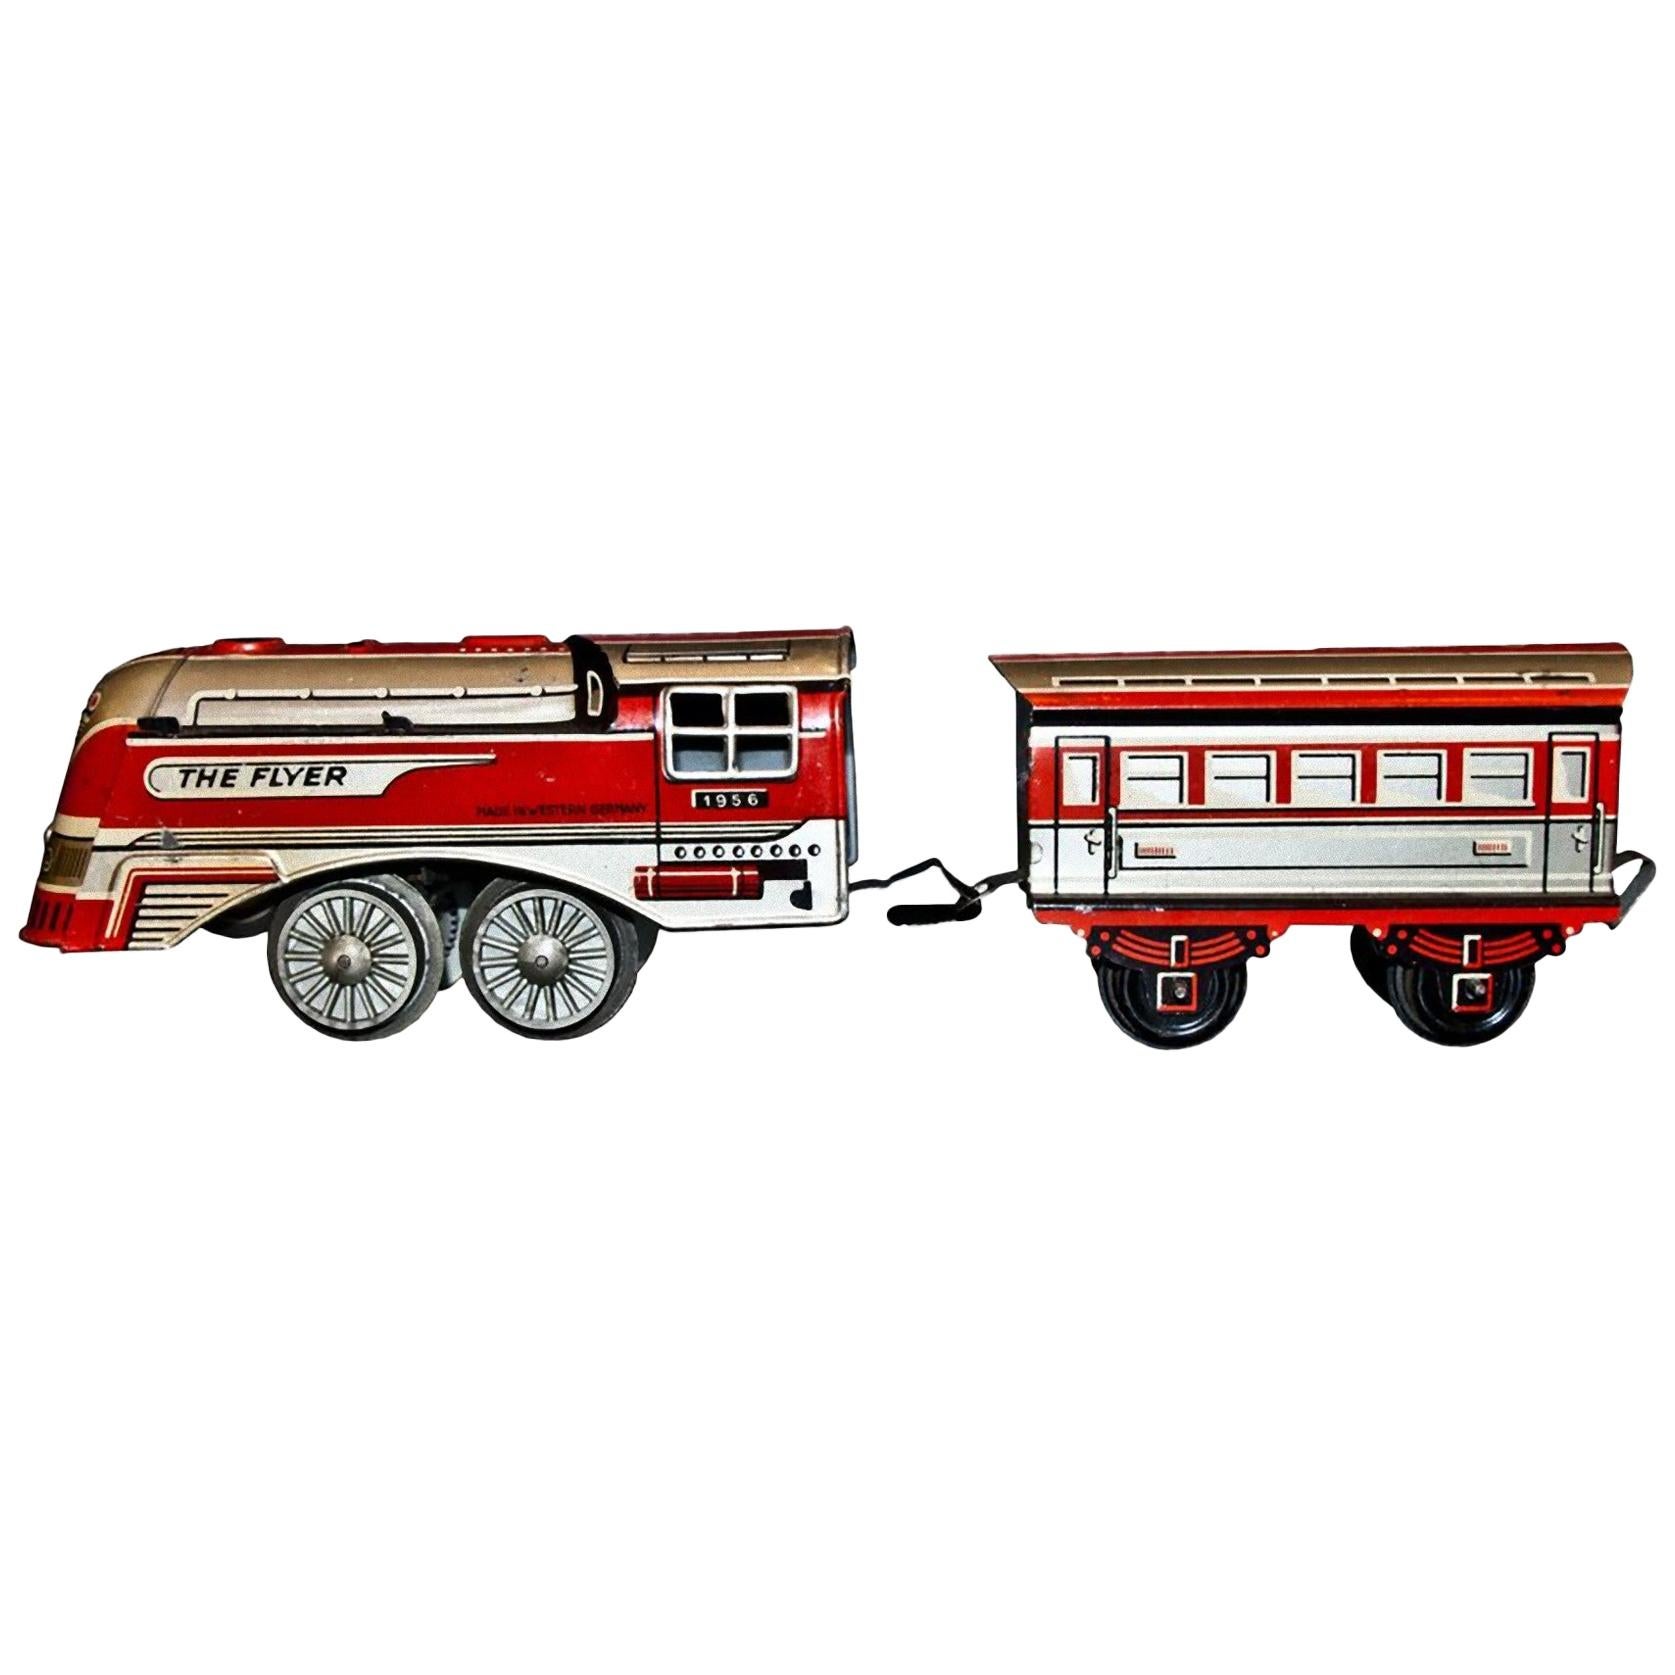 Vintage Toy, The Flyer 1956 Locomotive and Coach, 1956